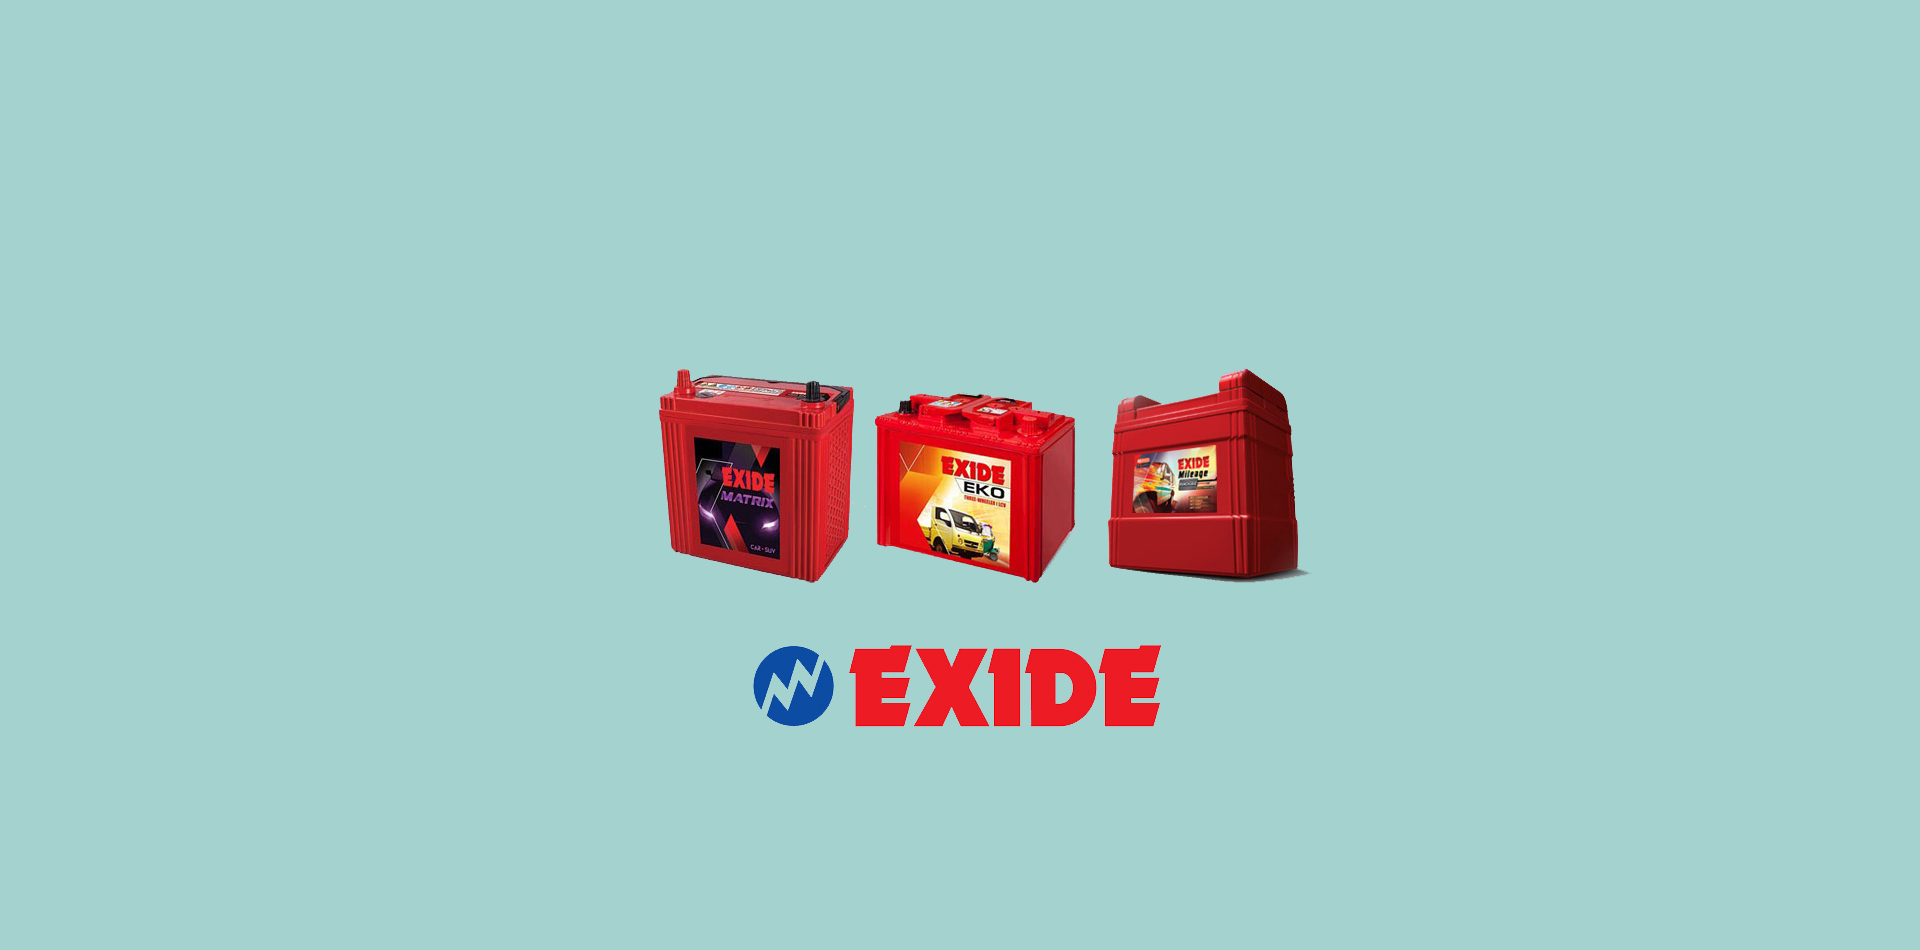 Exide Gold 150R | Buy Exide Gold 150R Battery | Exide Gold Battery Price |  Buy Exide Battery For Trucking | Exide Cheapest and best Truck batery